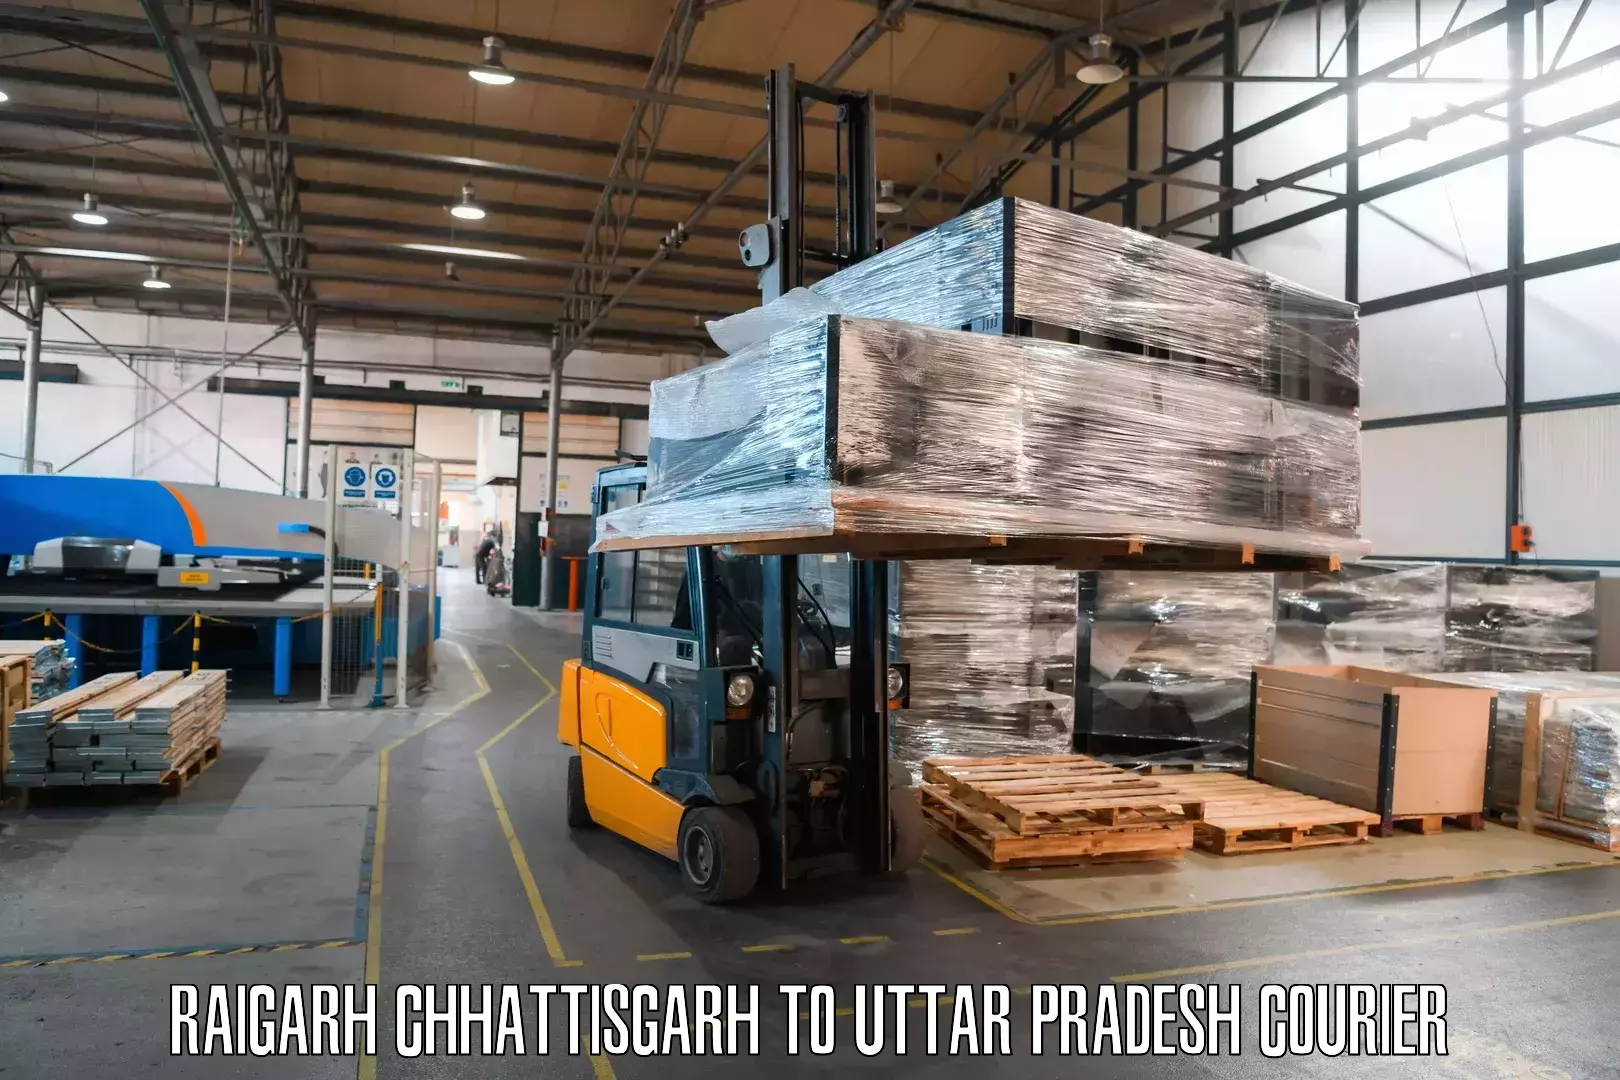 Seamless shipping experience Raigarh Chhattisgarh to King Georges Medical University Lucknow